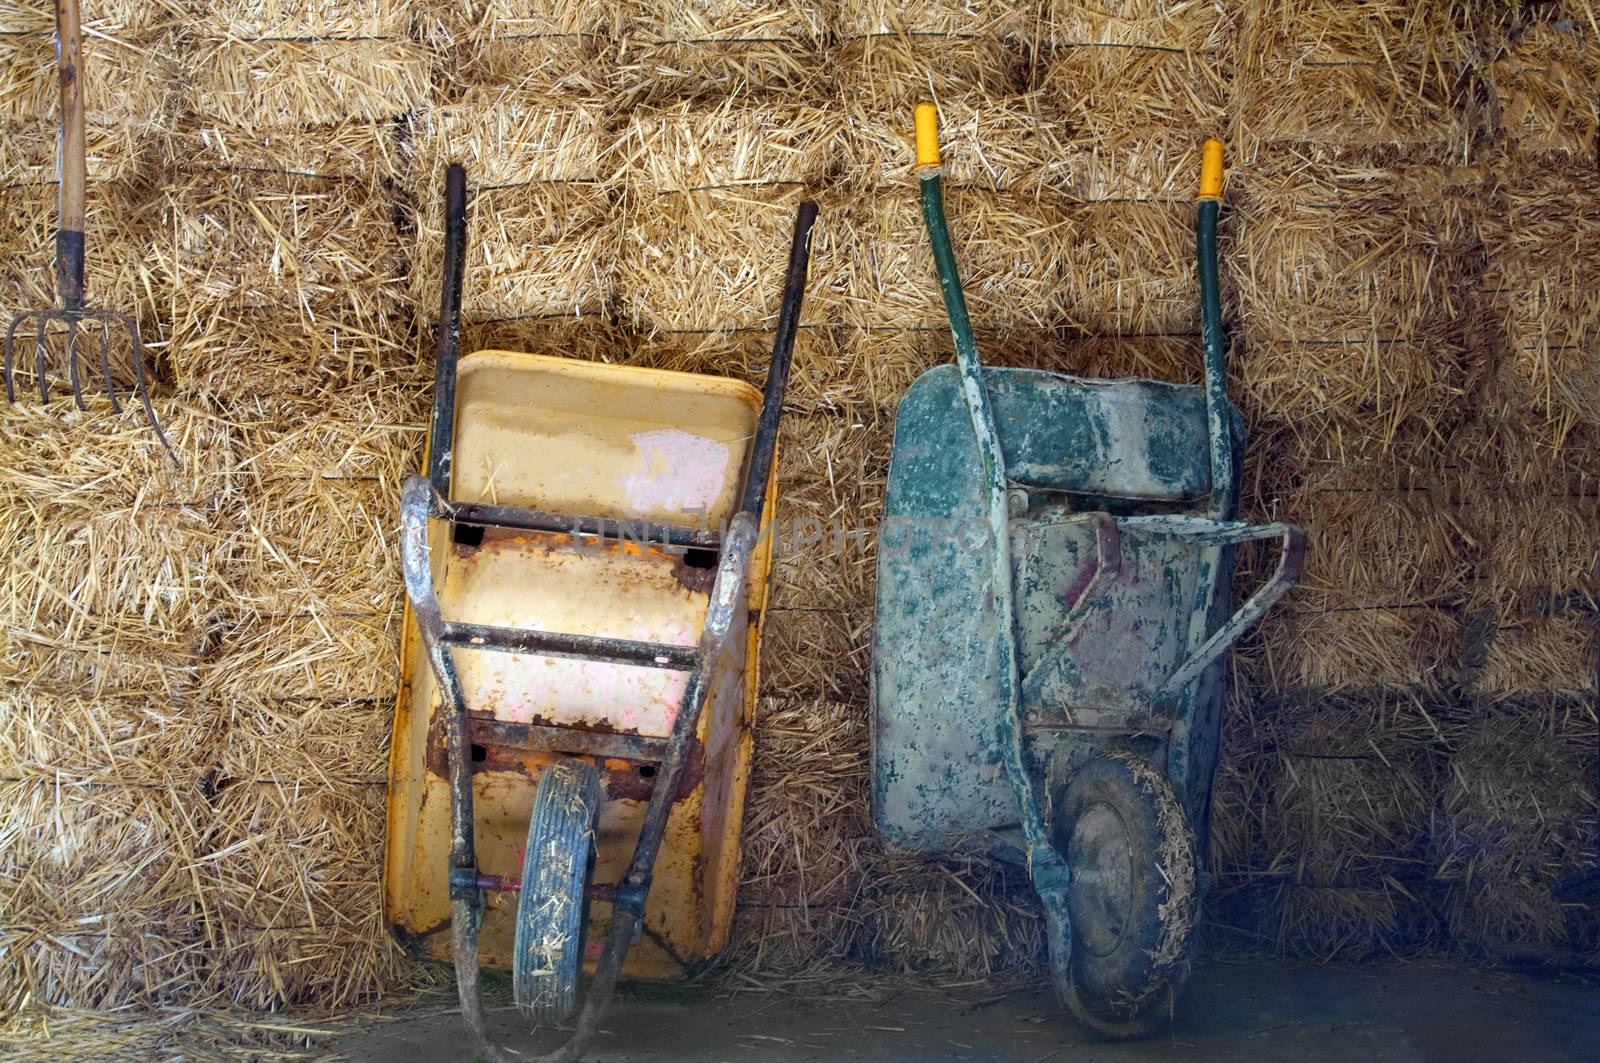 Two wheelbarrows on the hay background by Bezdnatm